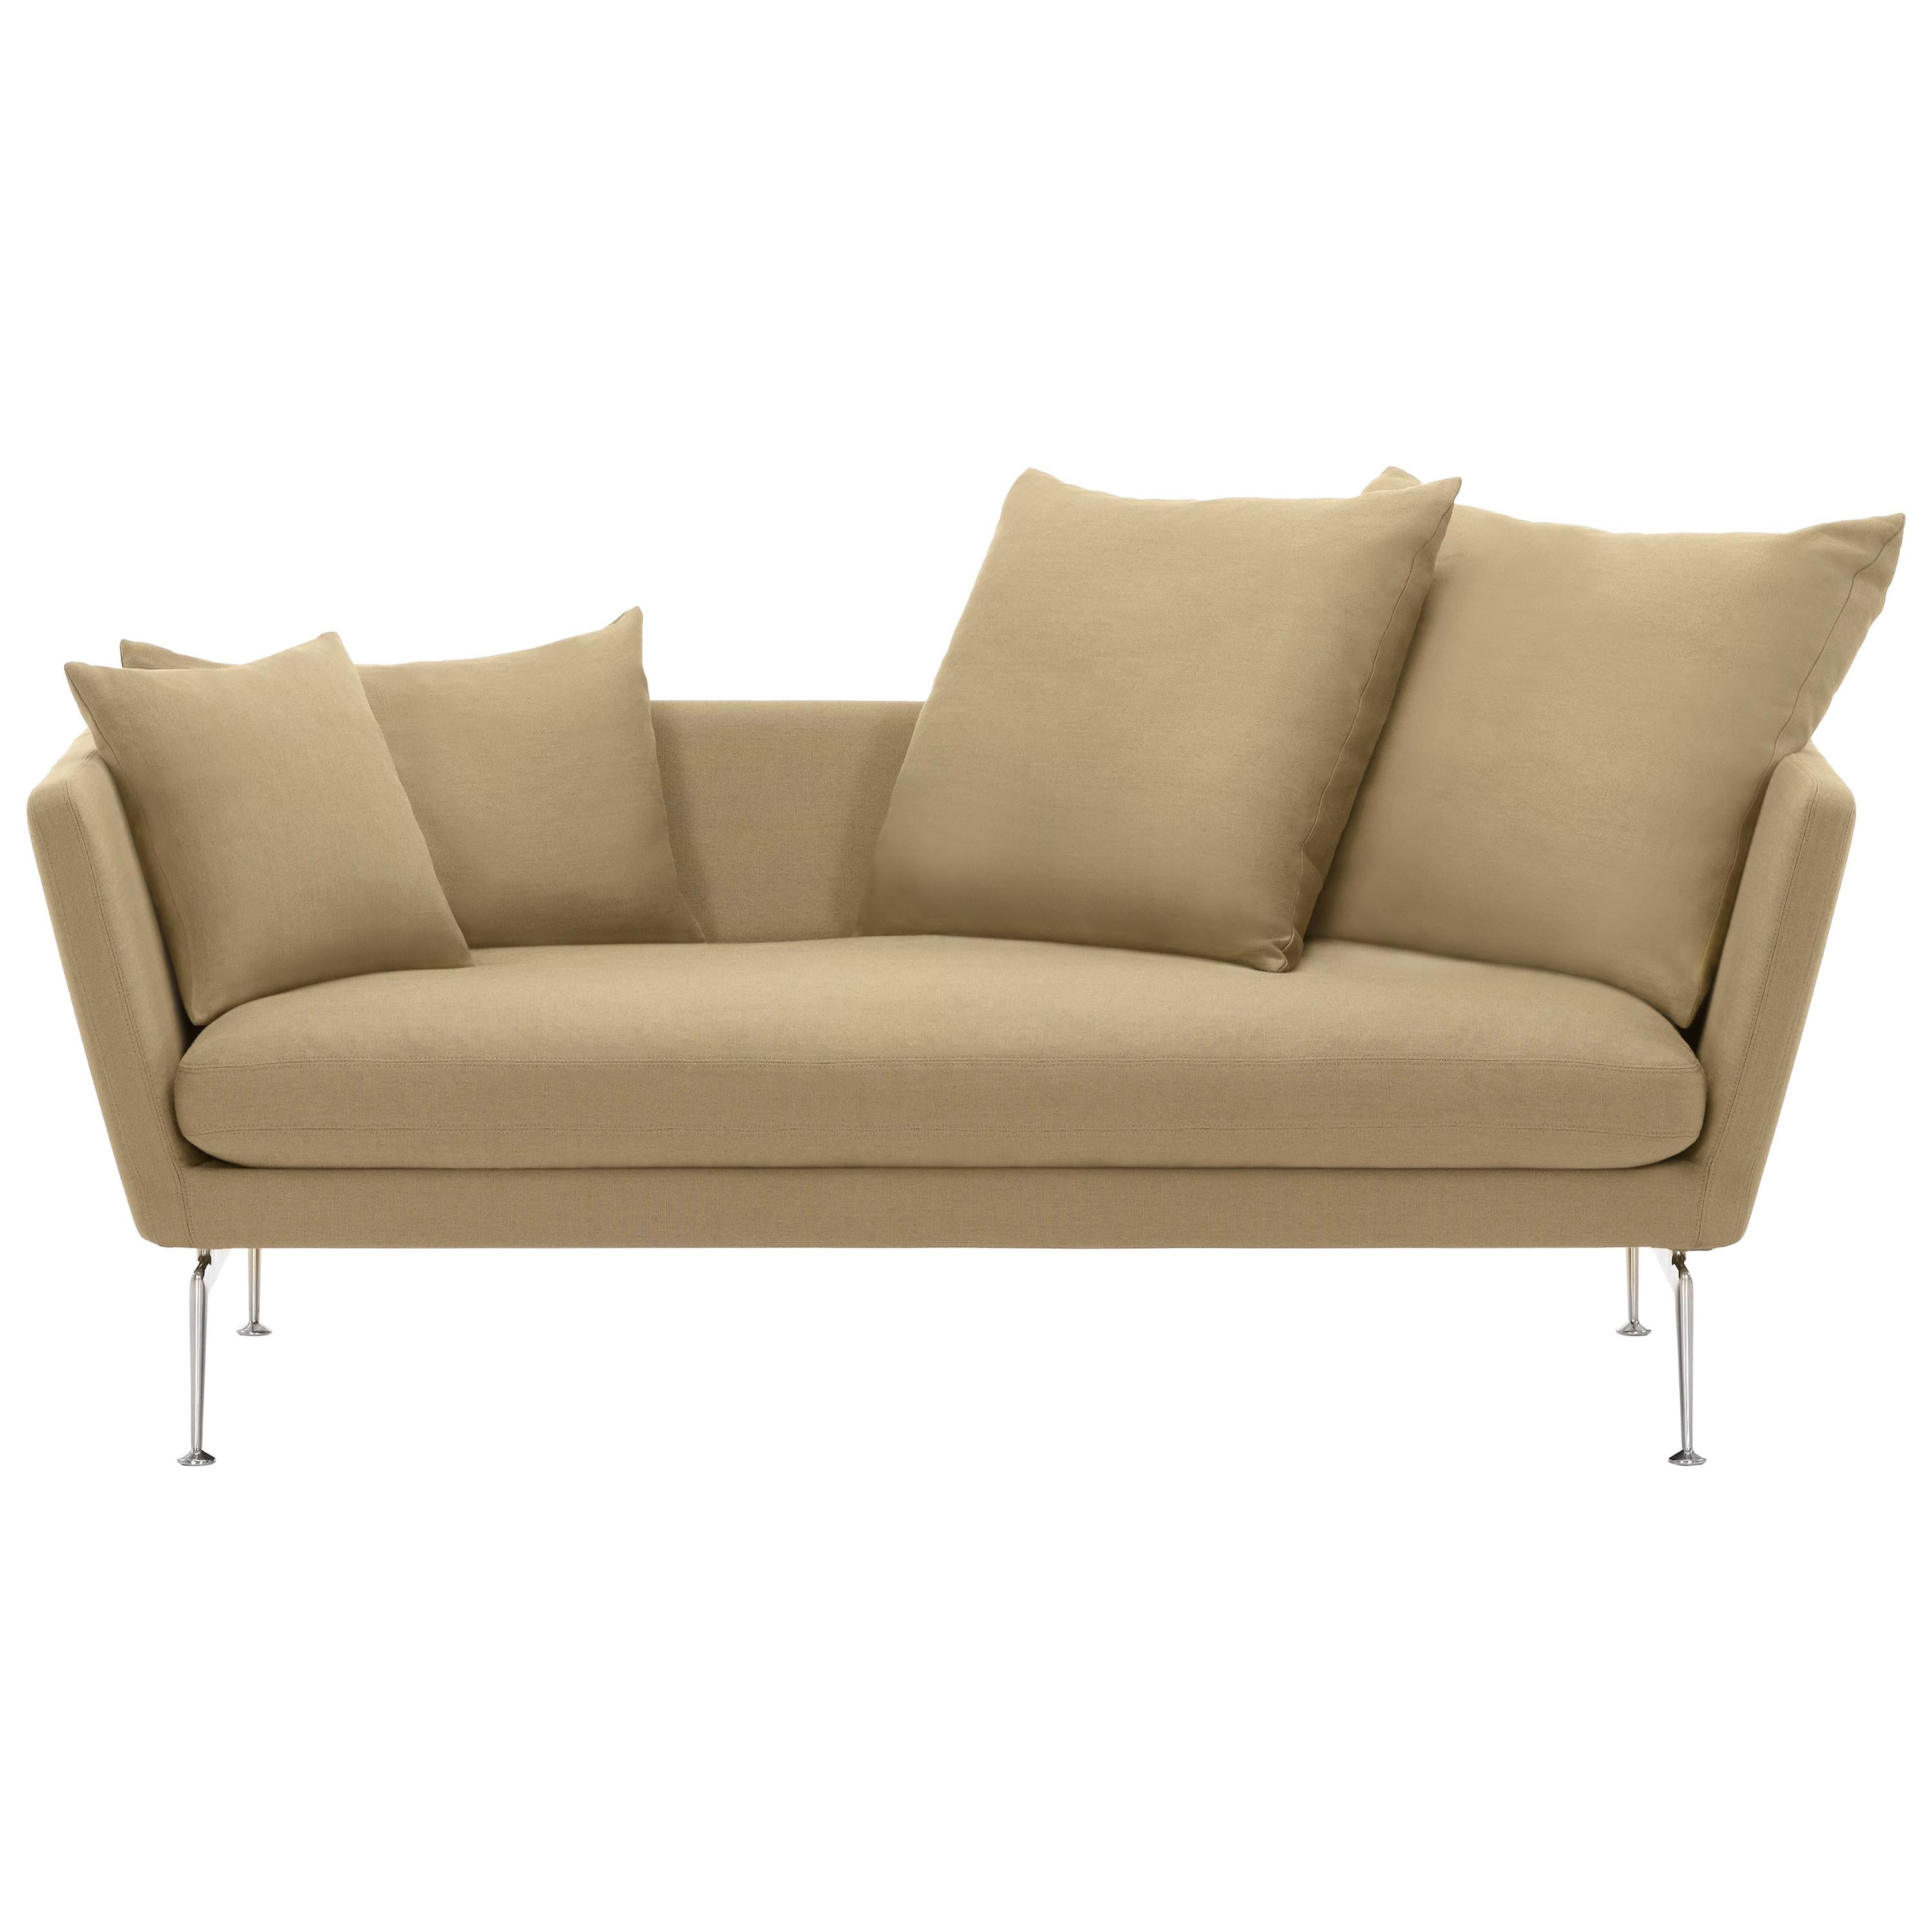 Vitra Suita Sofa Two-Seat in Parchment Olimpo by Antonio Citterio im Angebot